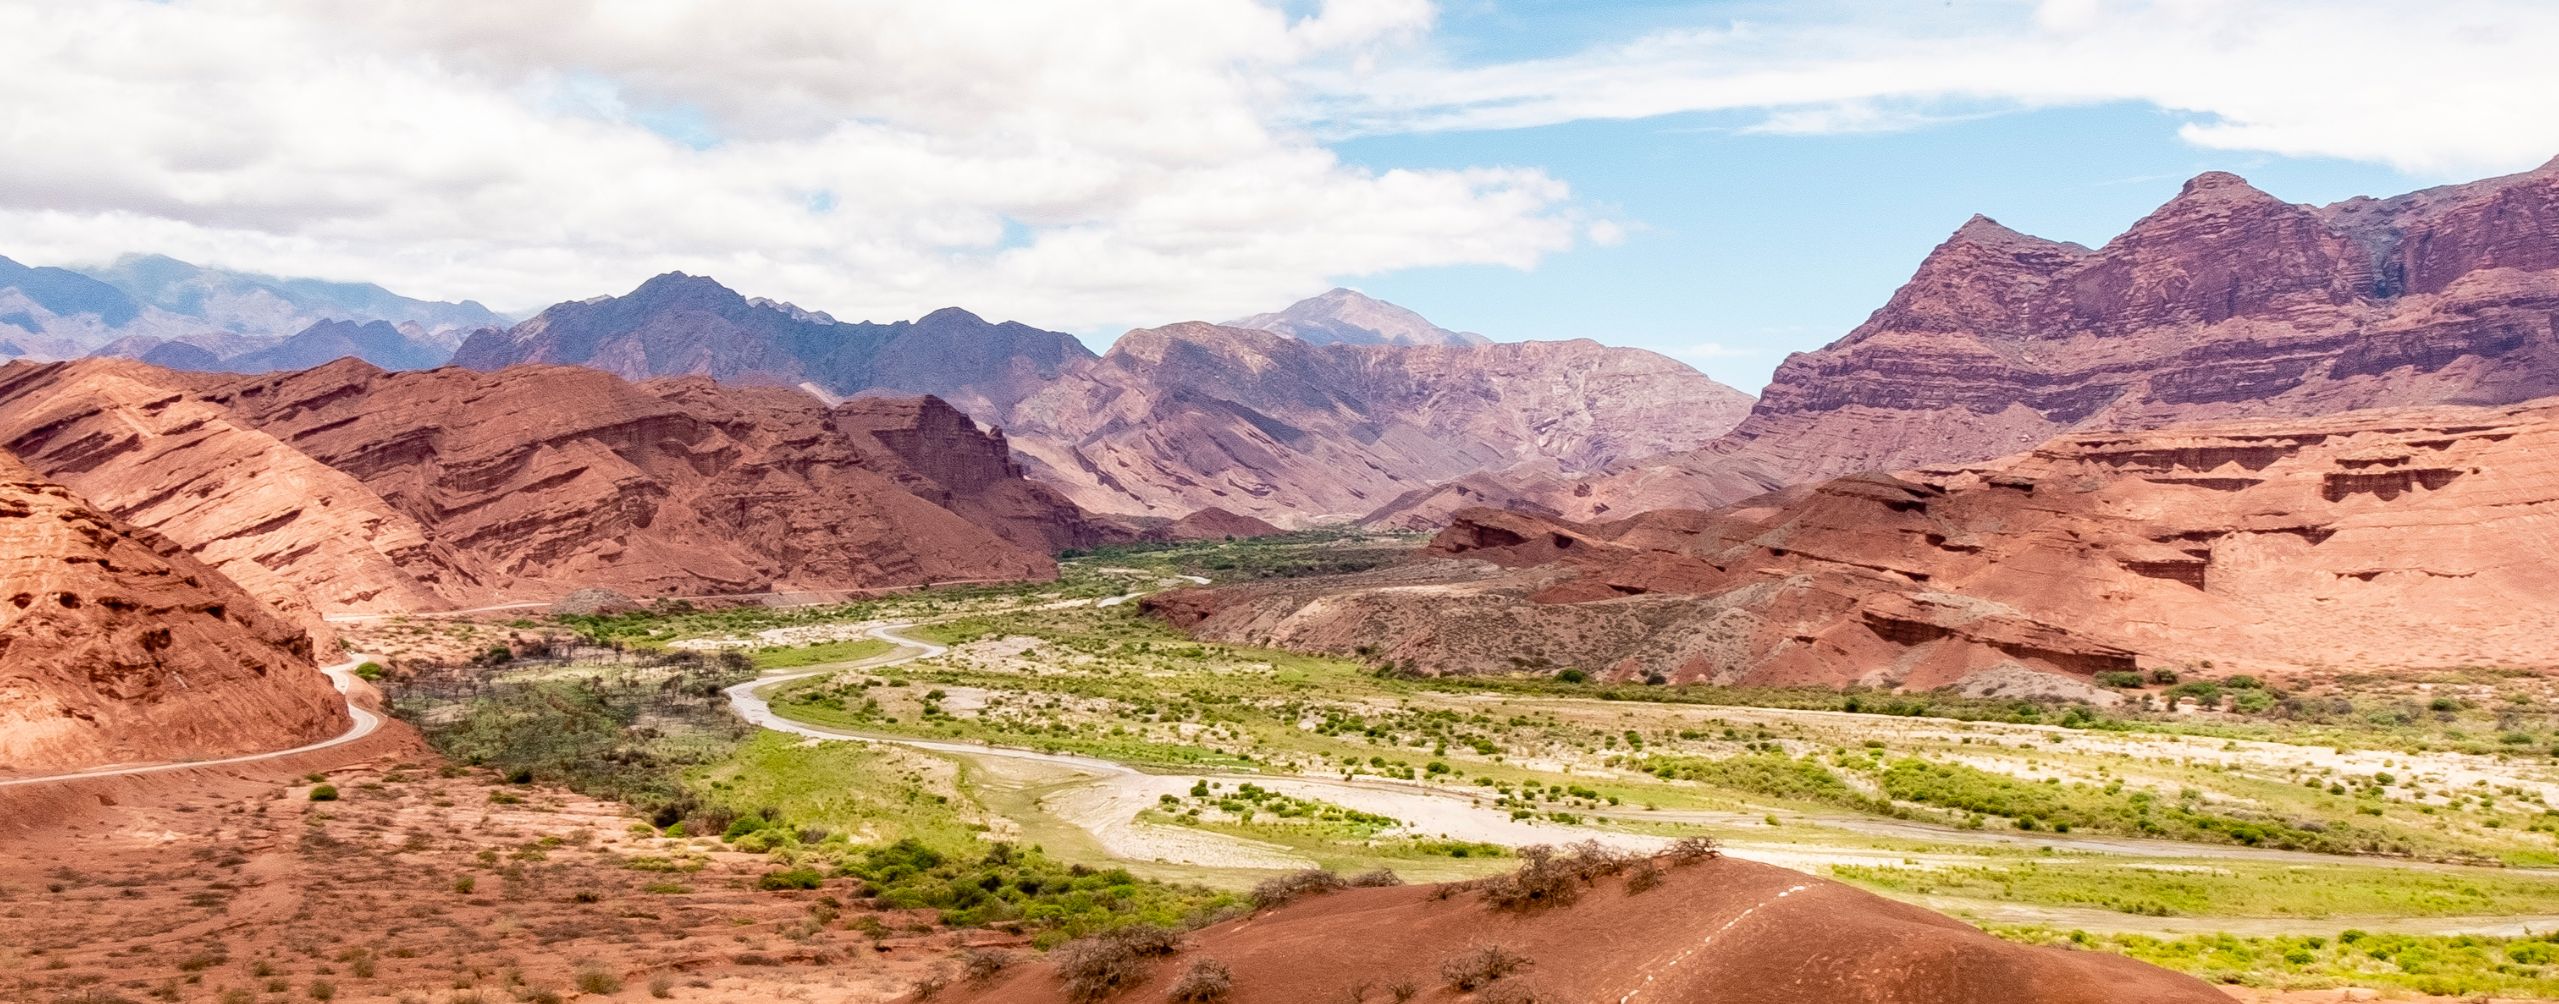 The red hilly landscape of Argentina's Cafayete